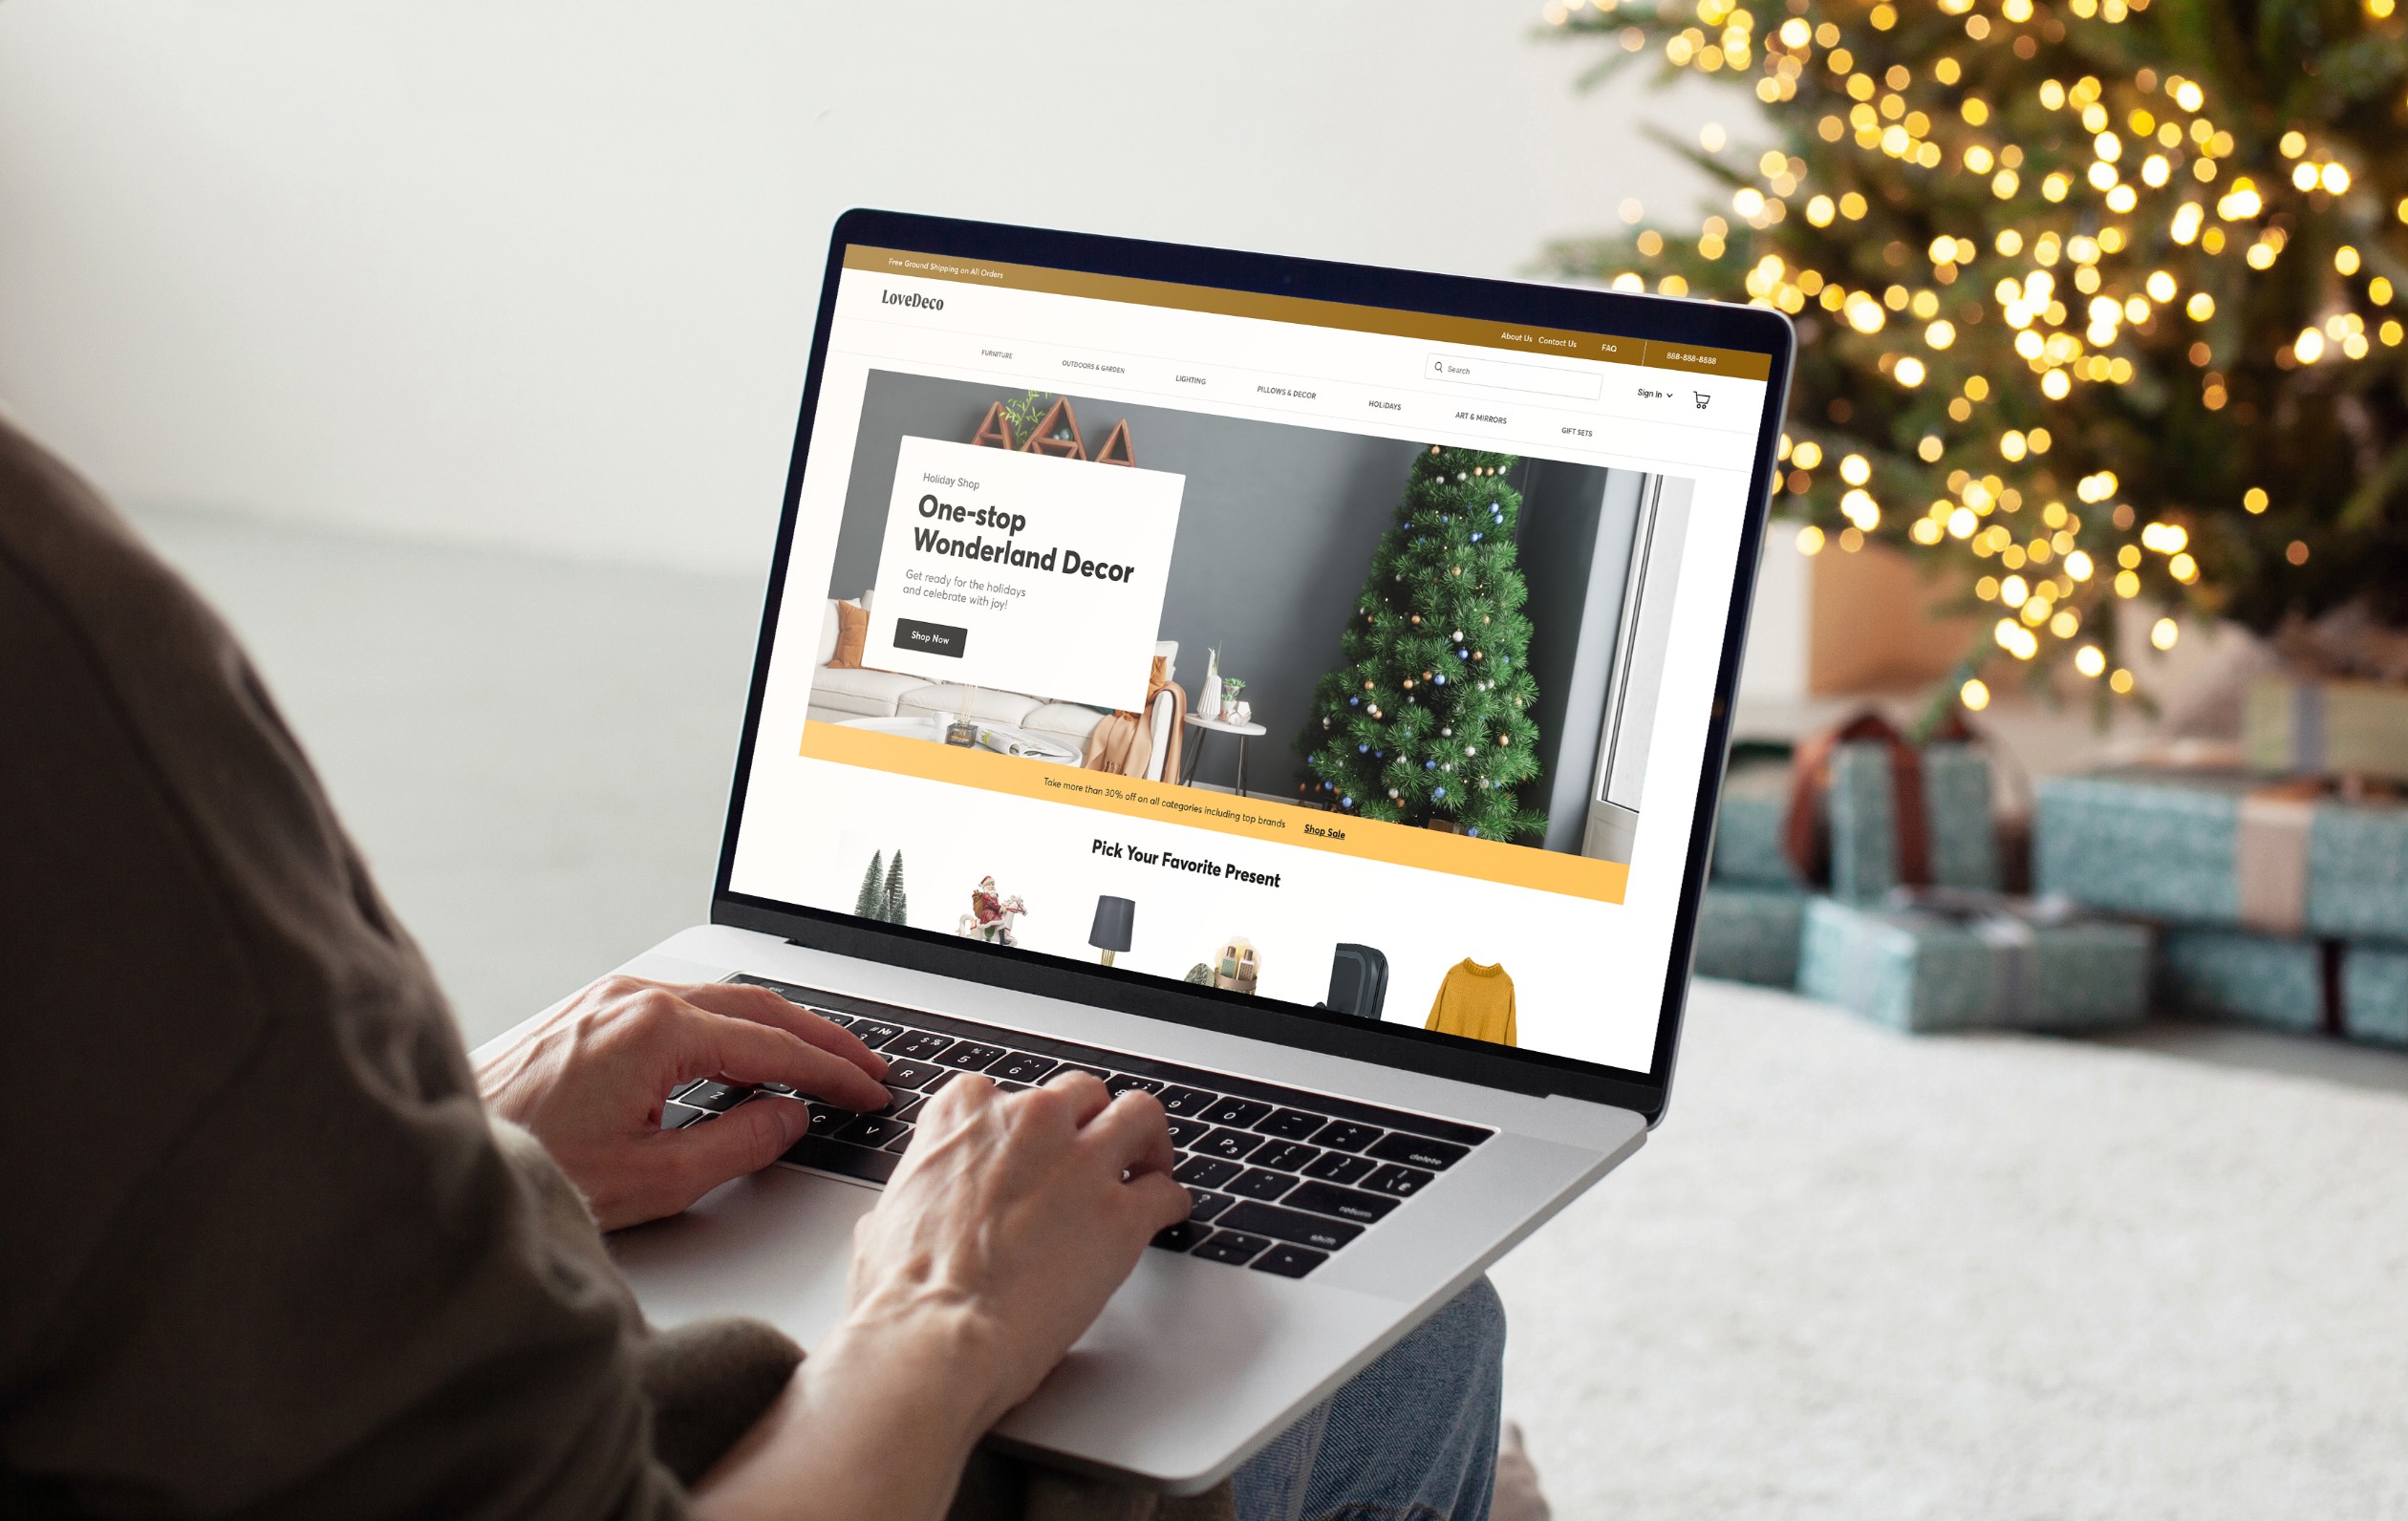 Photograph of a person sitting by a Christmas tree viewing an online store on their laptop